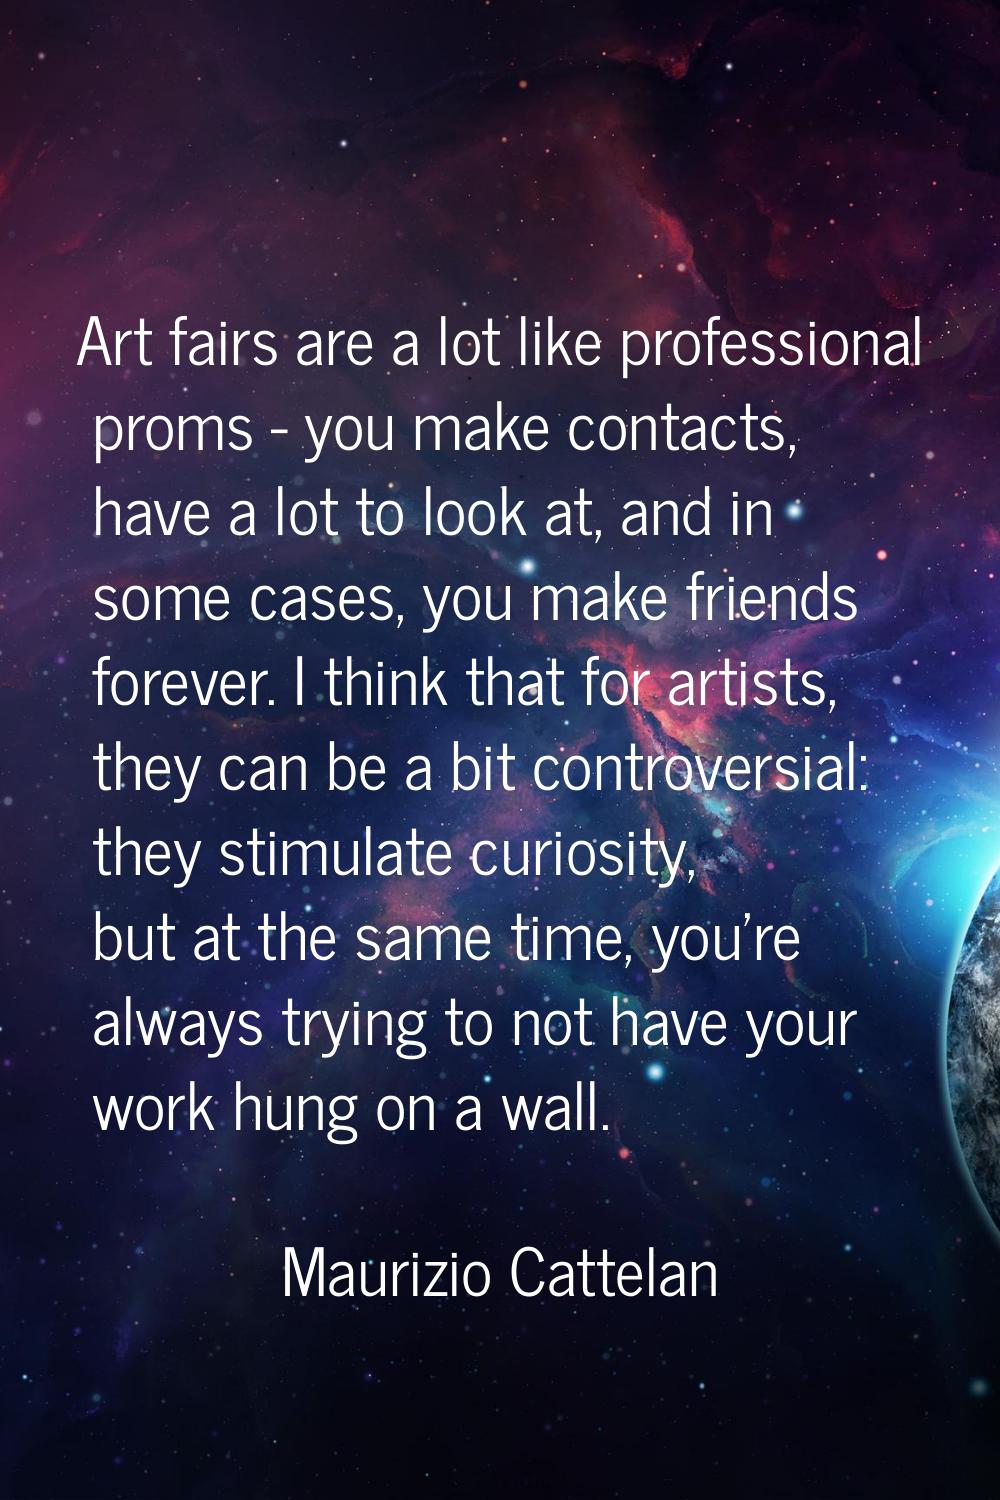 Art fairs are a lot like professional proms - you make contacts, have a lot to look at, and in some